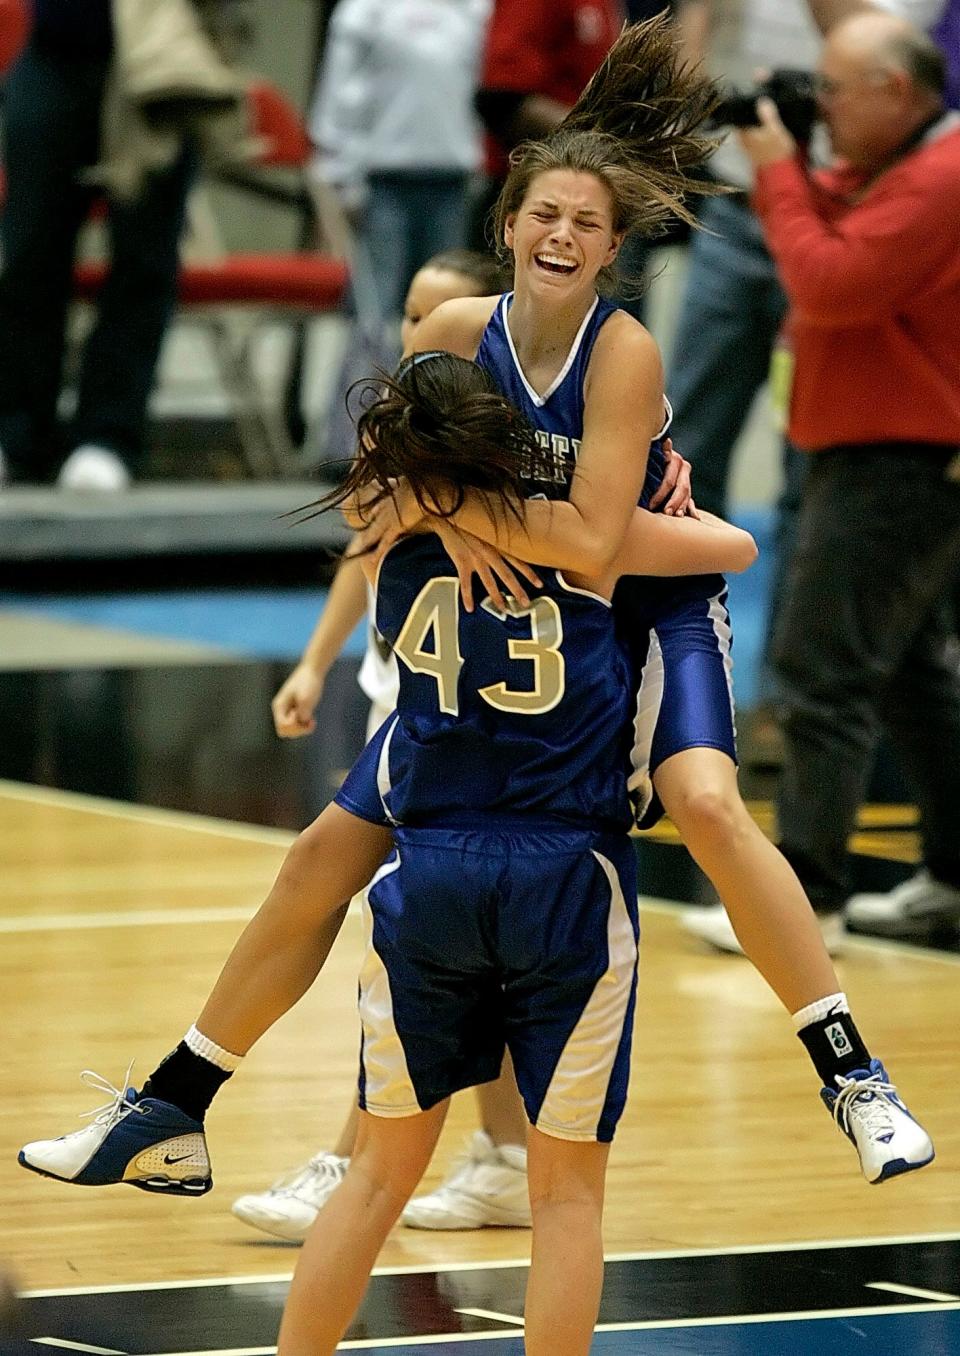 Whitefish Bay's Katie Wysocky (43) gives Meghan Warner a hug at the end of the game after Warner made the game-winning shot to beat Mosinee 45-44 in a WIAA girls Division 2 semifinal high school basketball game Friday, March 10, 2006, in Madison.